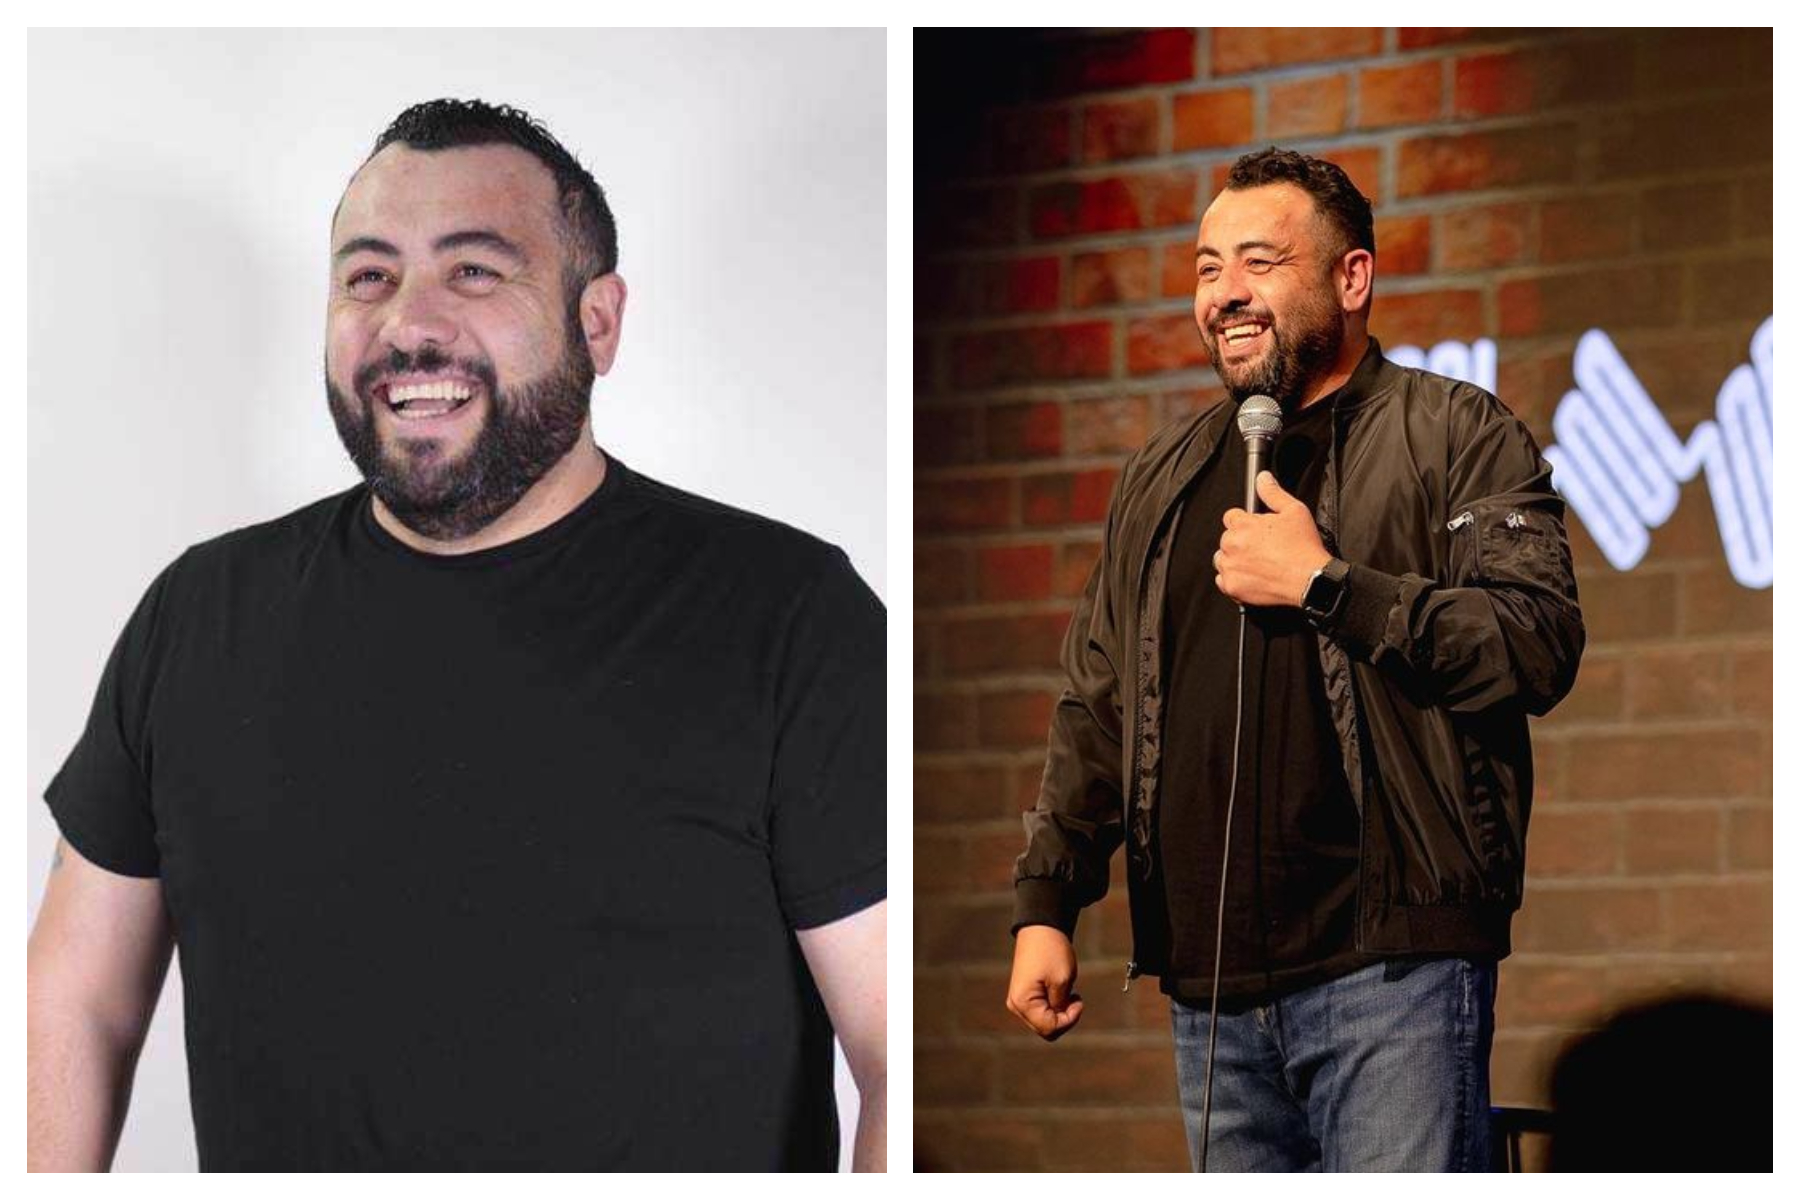 Mexican stand-up comedians